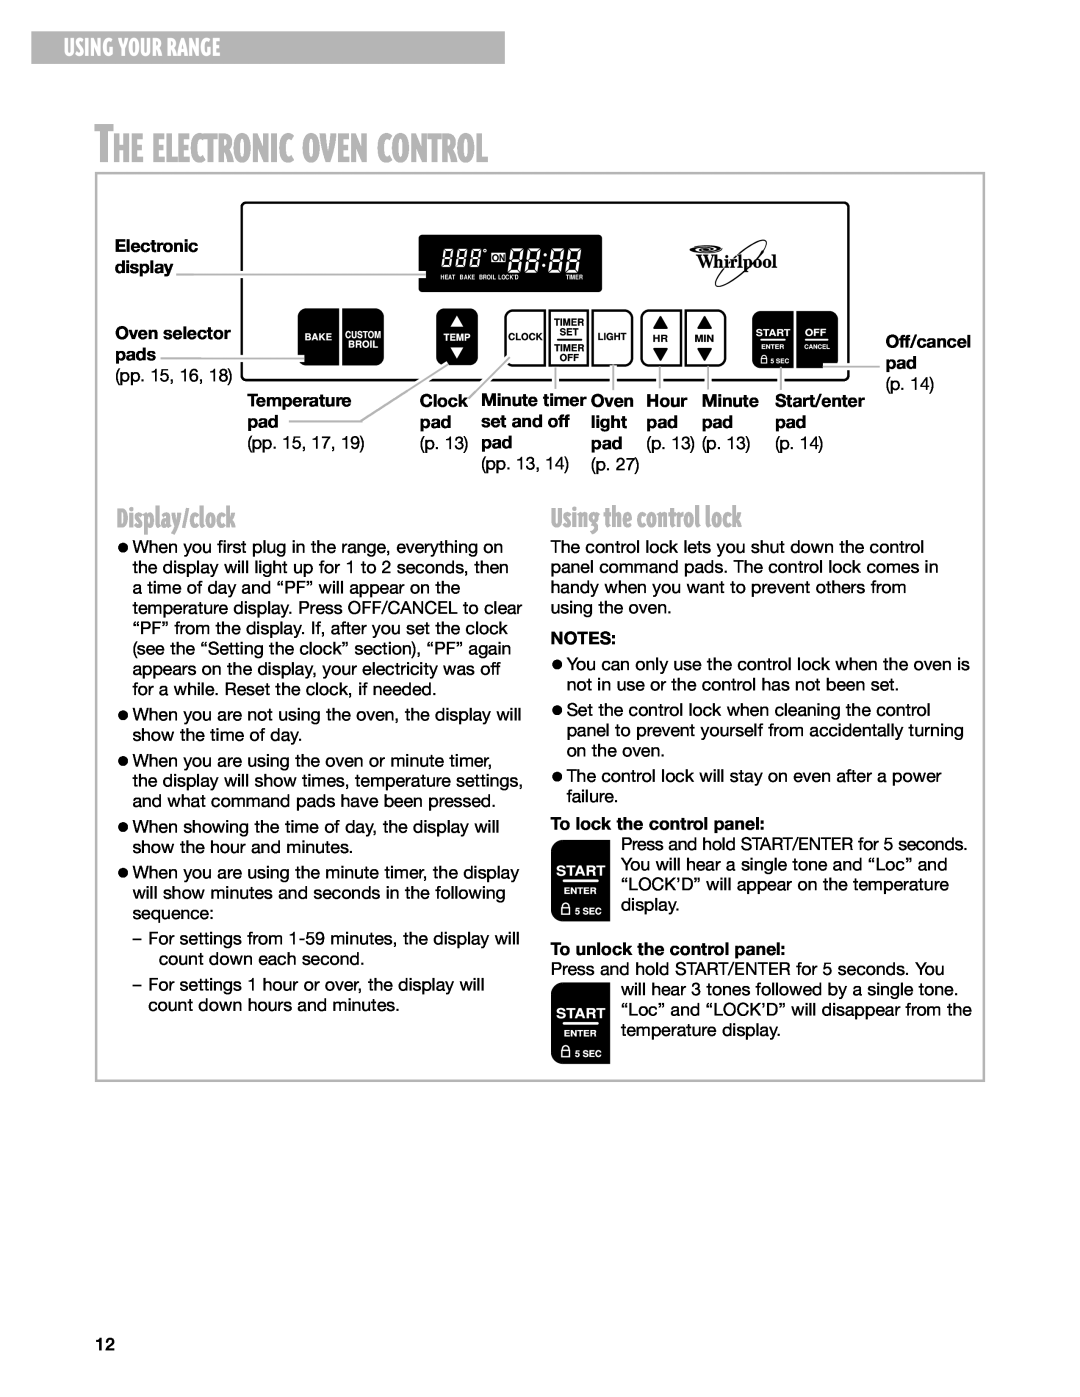 Whirlpool RF325PXG The Electronic Oven Control, Display/clock, Using the control lock, Using Your Range, display, pads, pp 